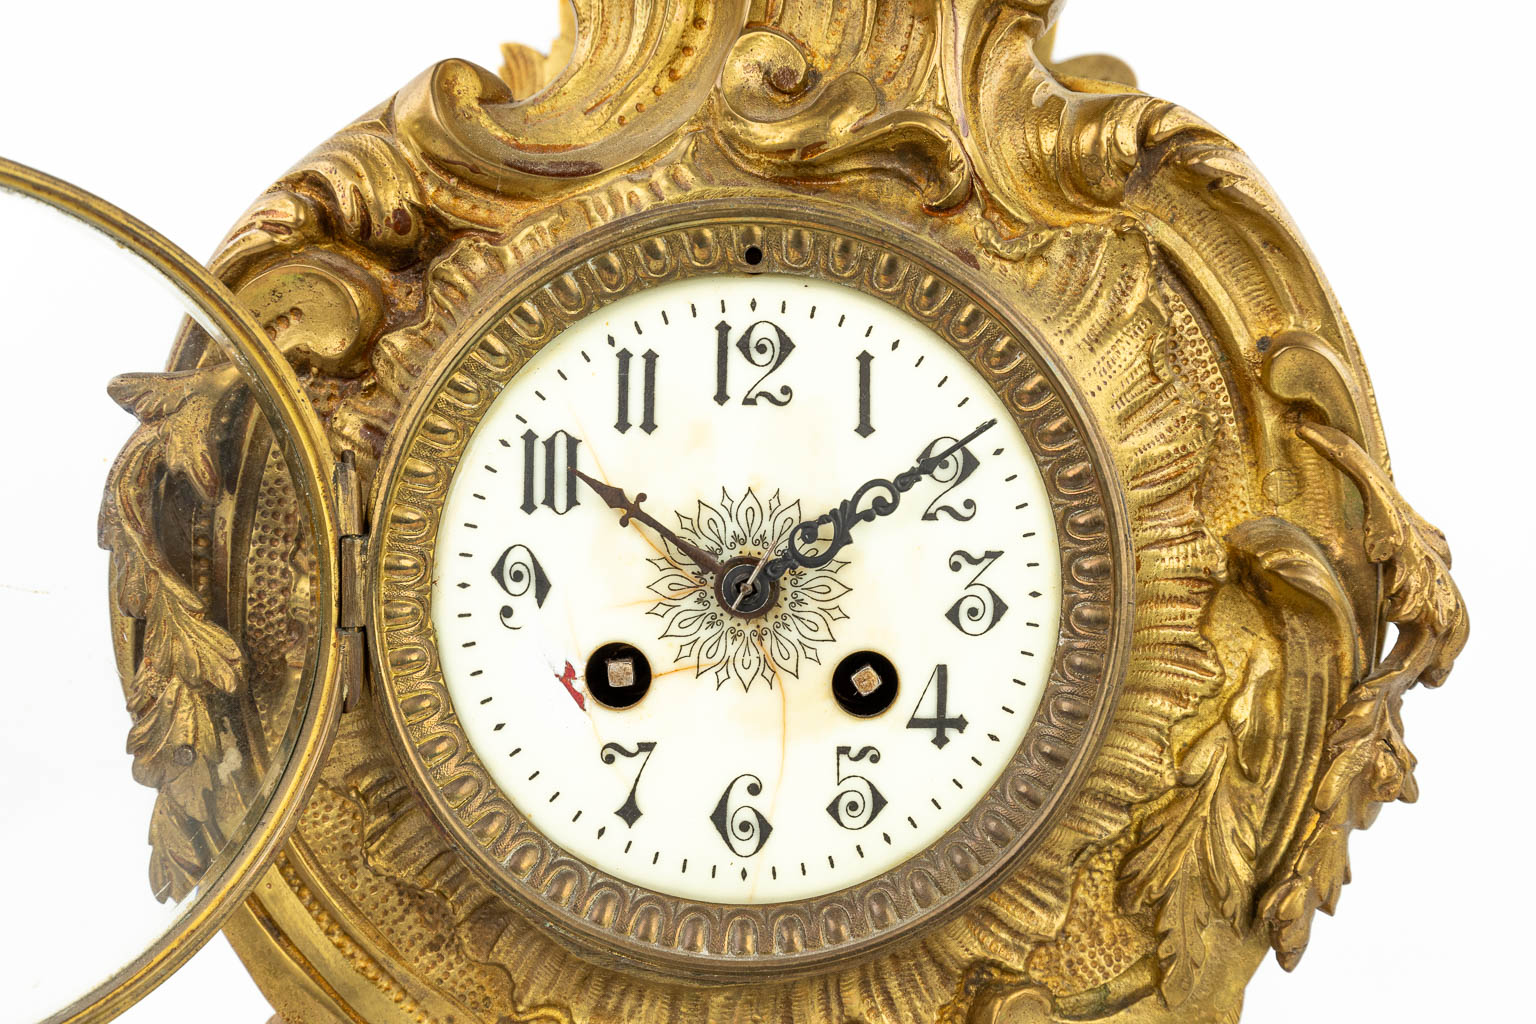 A table clock made of bronze in Louis XV style. (H:60cm)